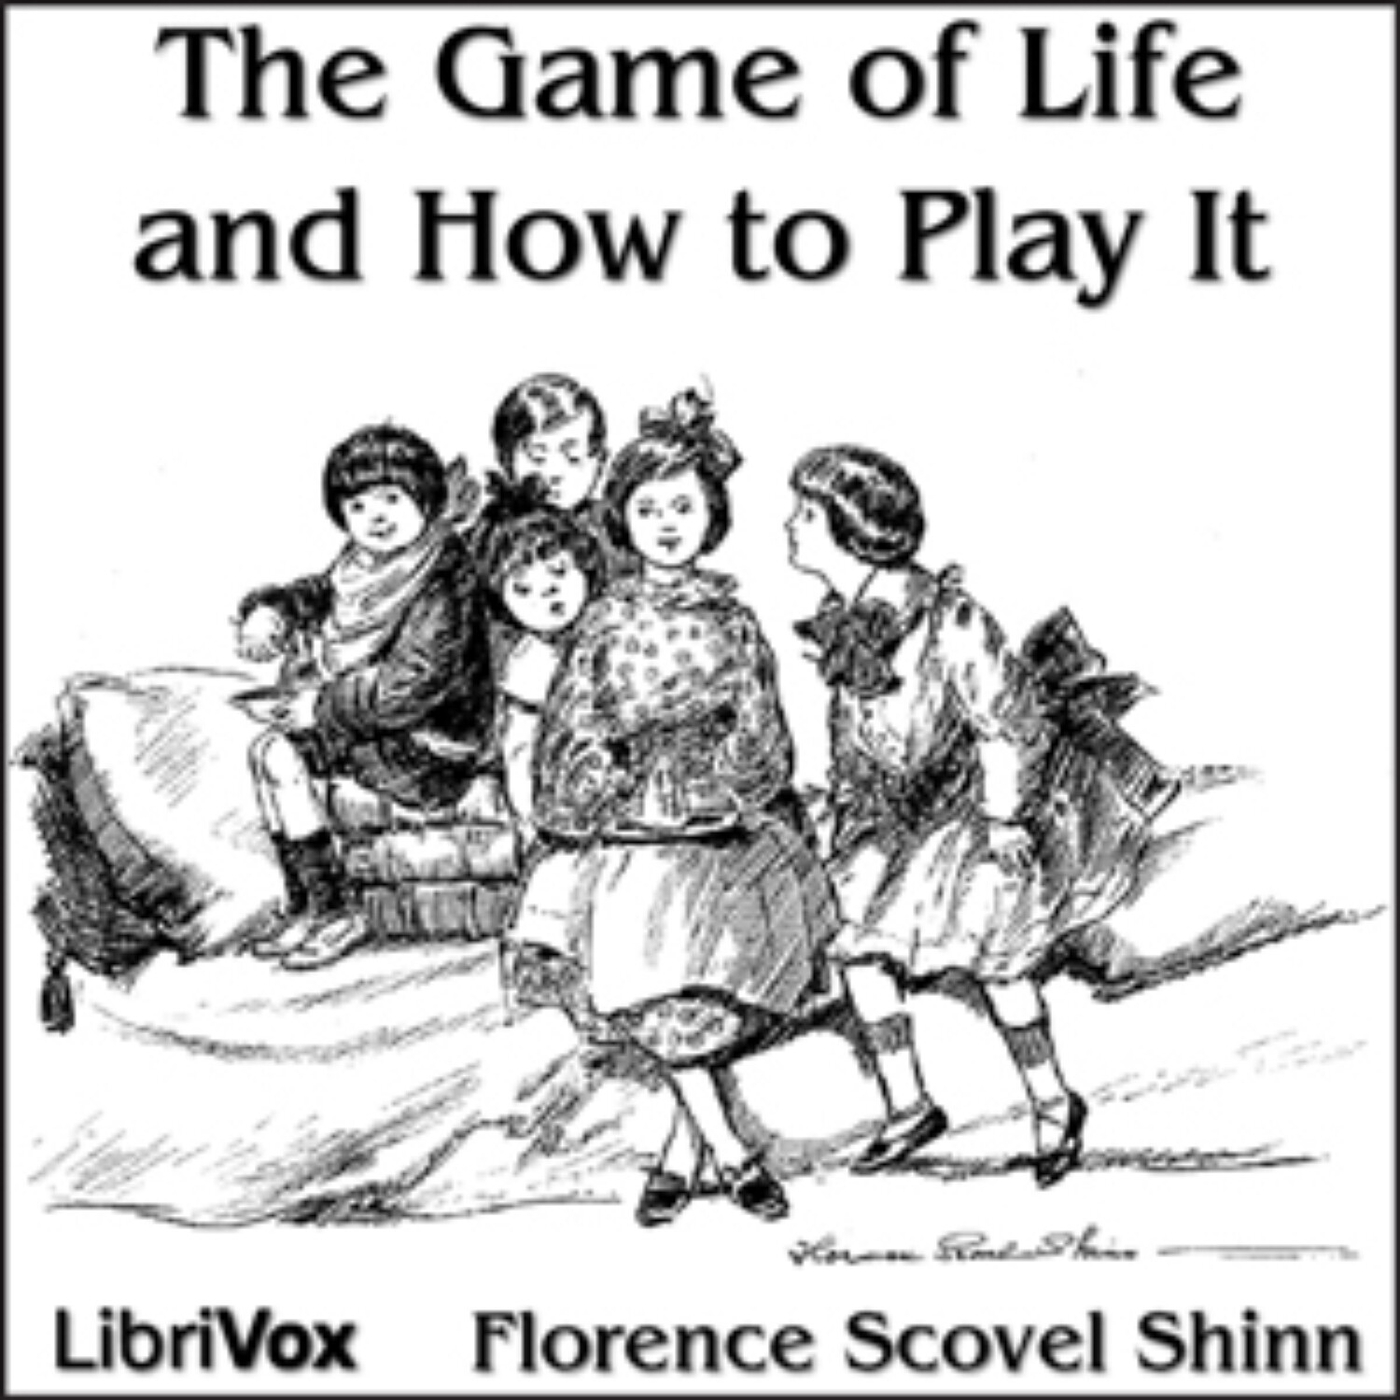 Florence Scovel Shinn - The game of life is a game of